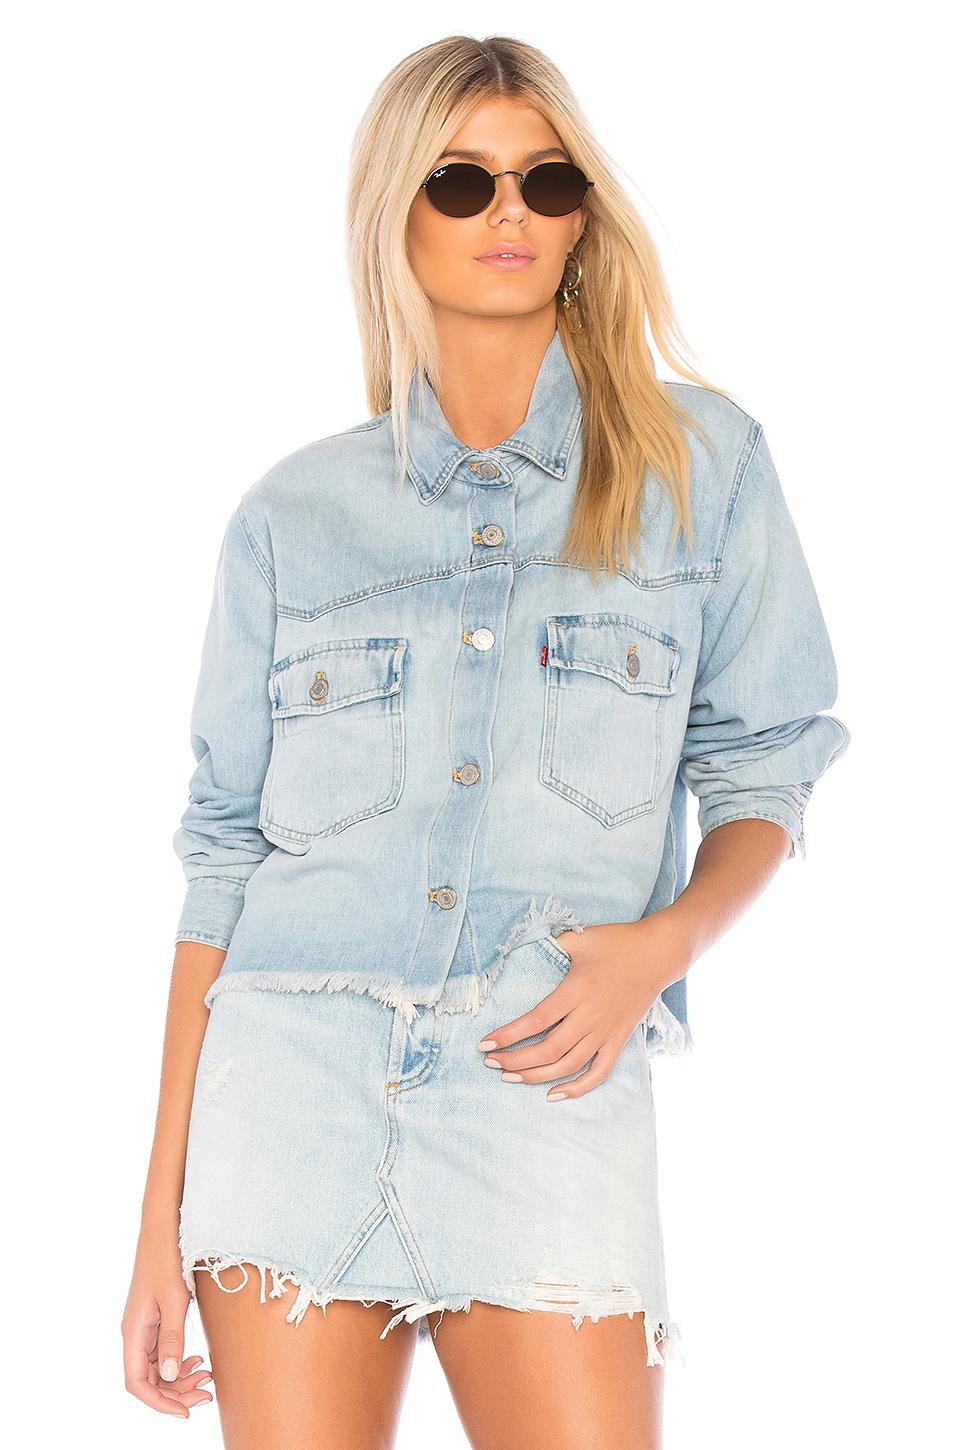 Levi's Addison Shirt in Blue - Lyst